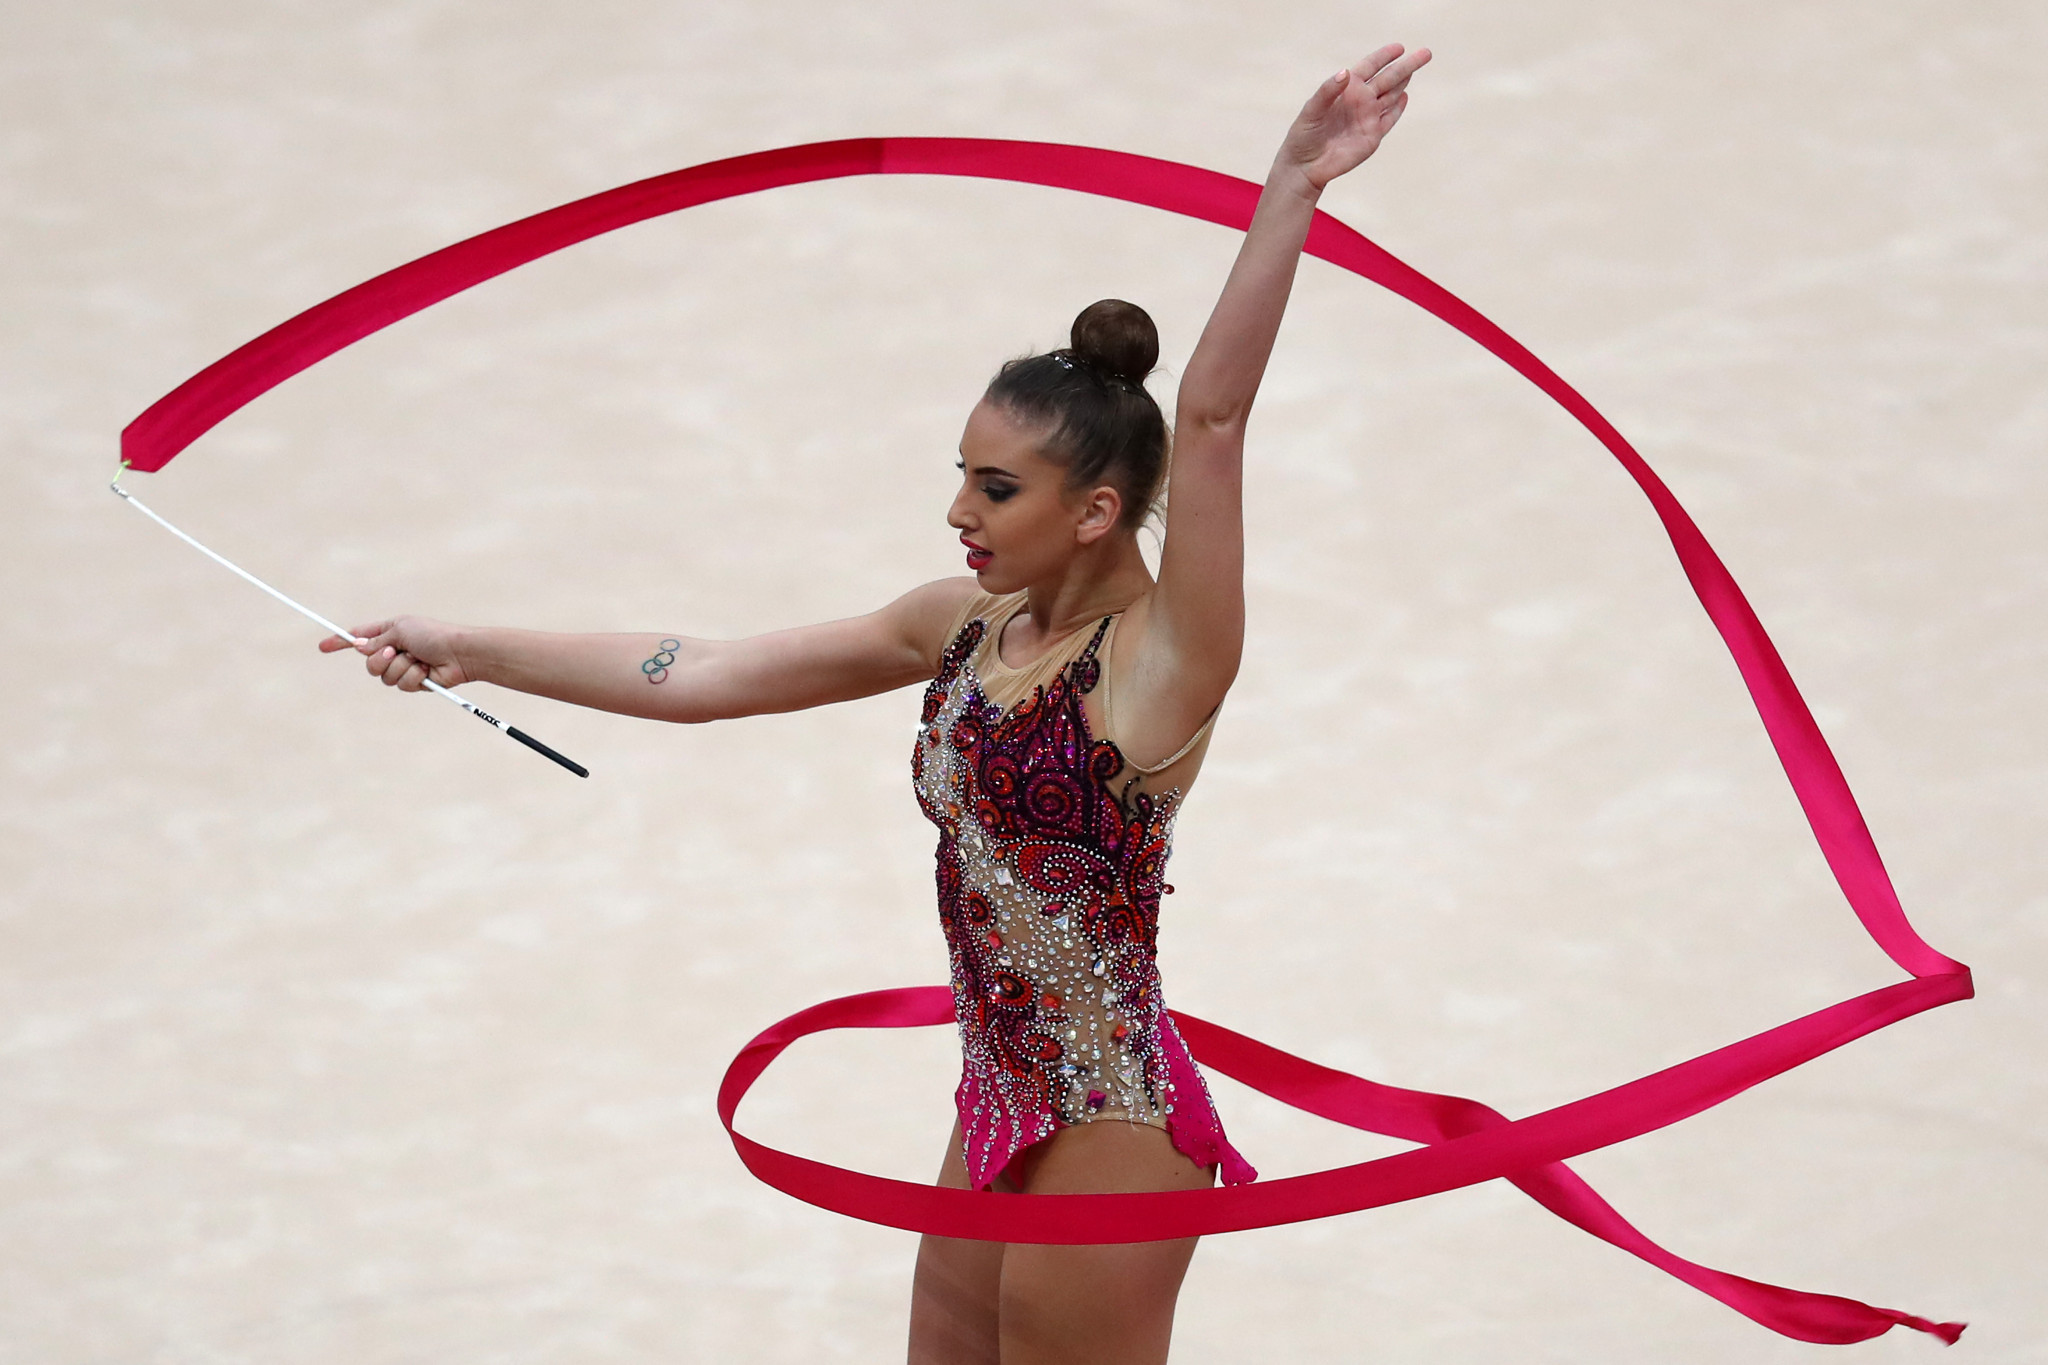 Bulgaria's Katrin Taseva will still be able to compete at the European Rhythmic Gymnastics Championships ©Getty Images